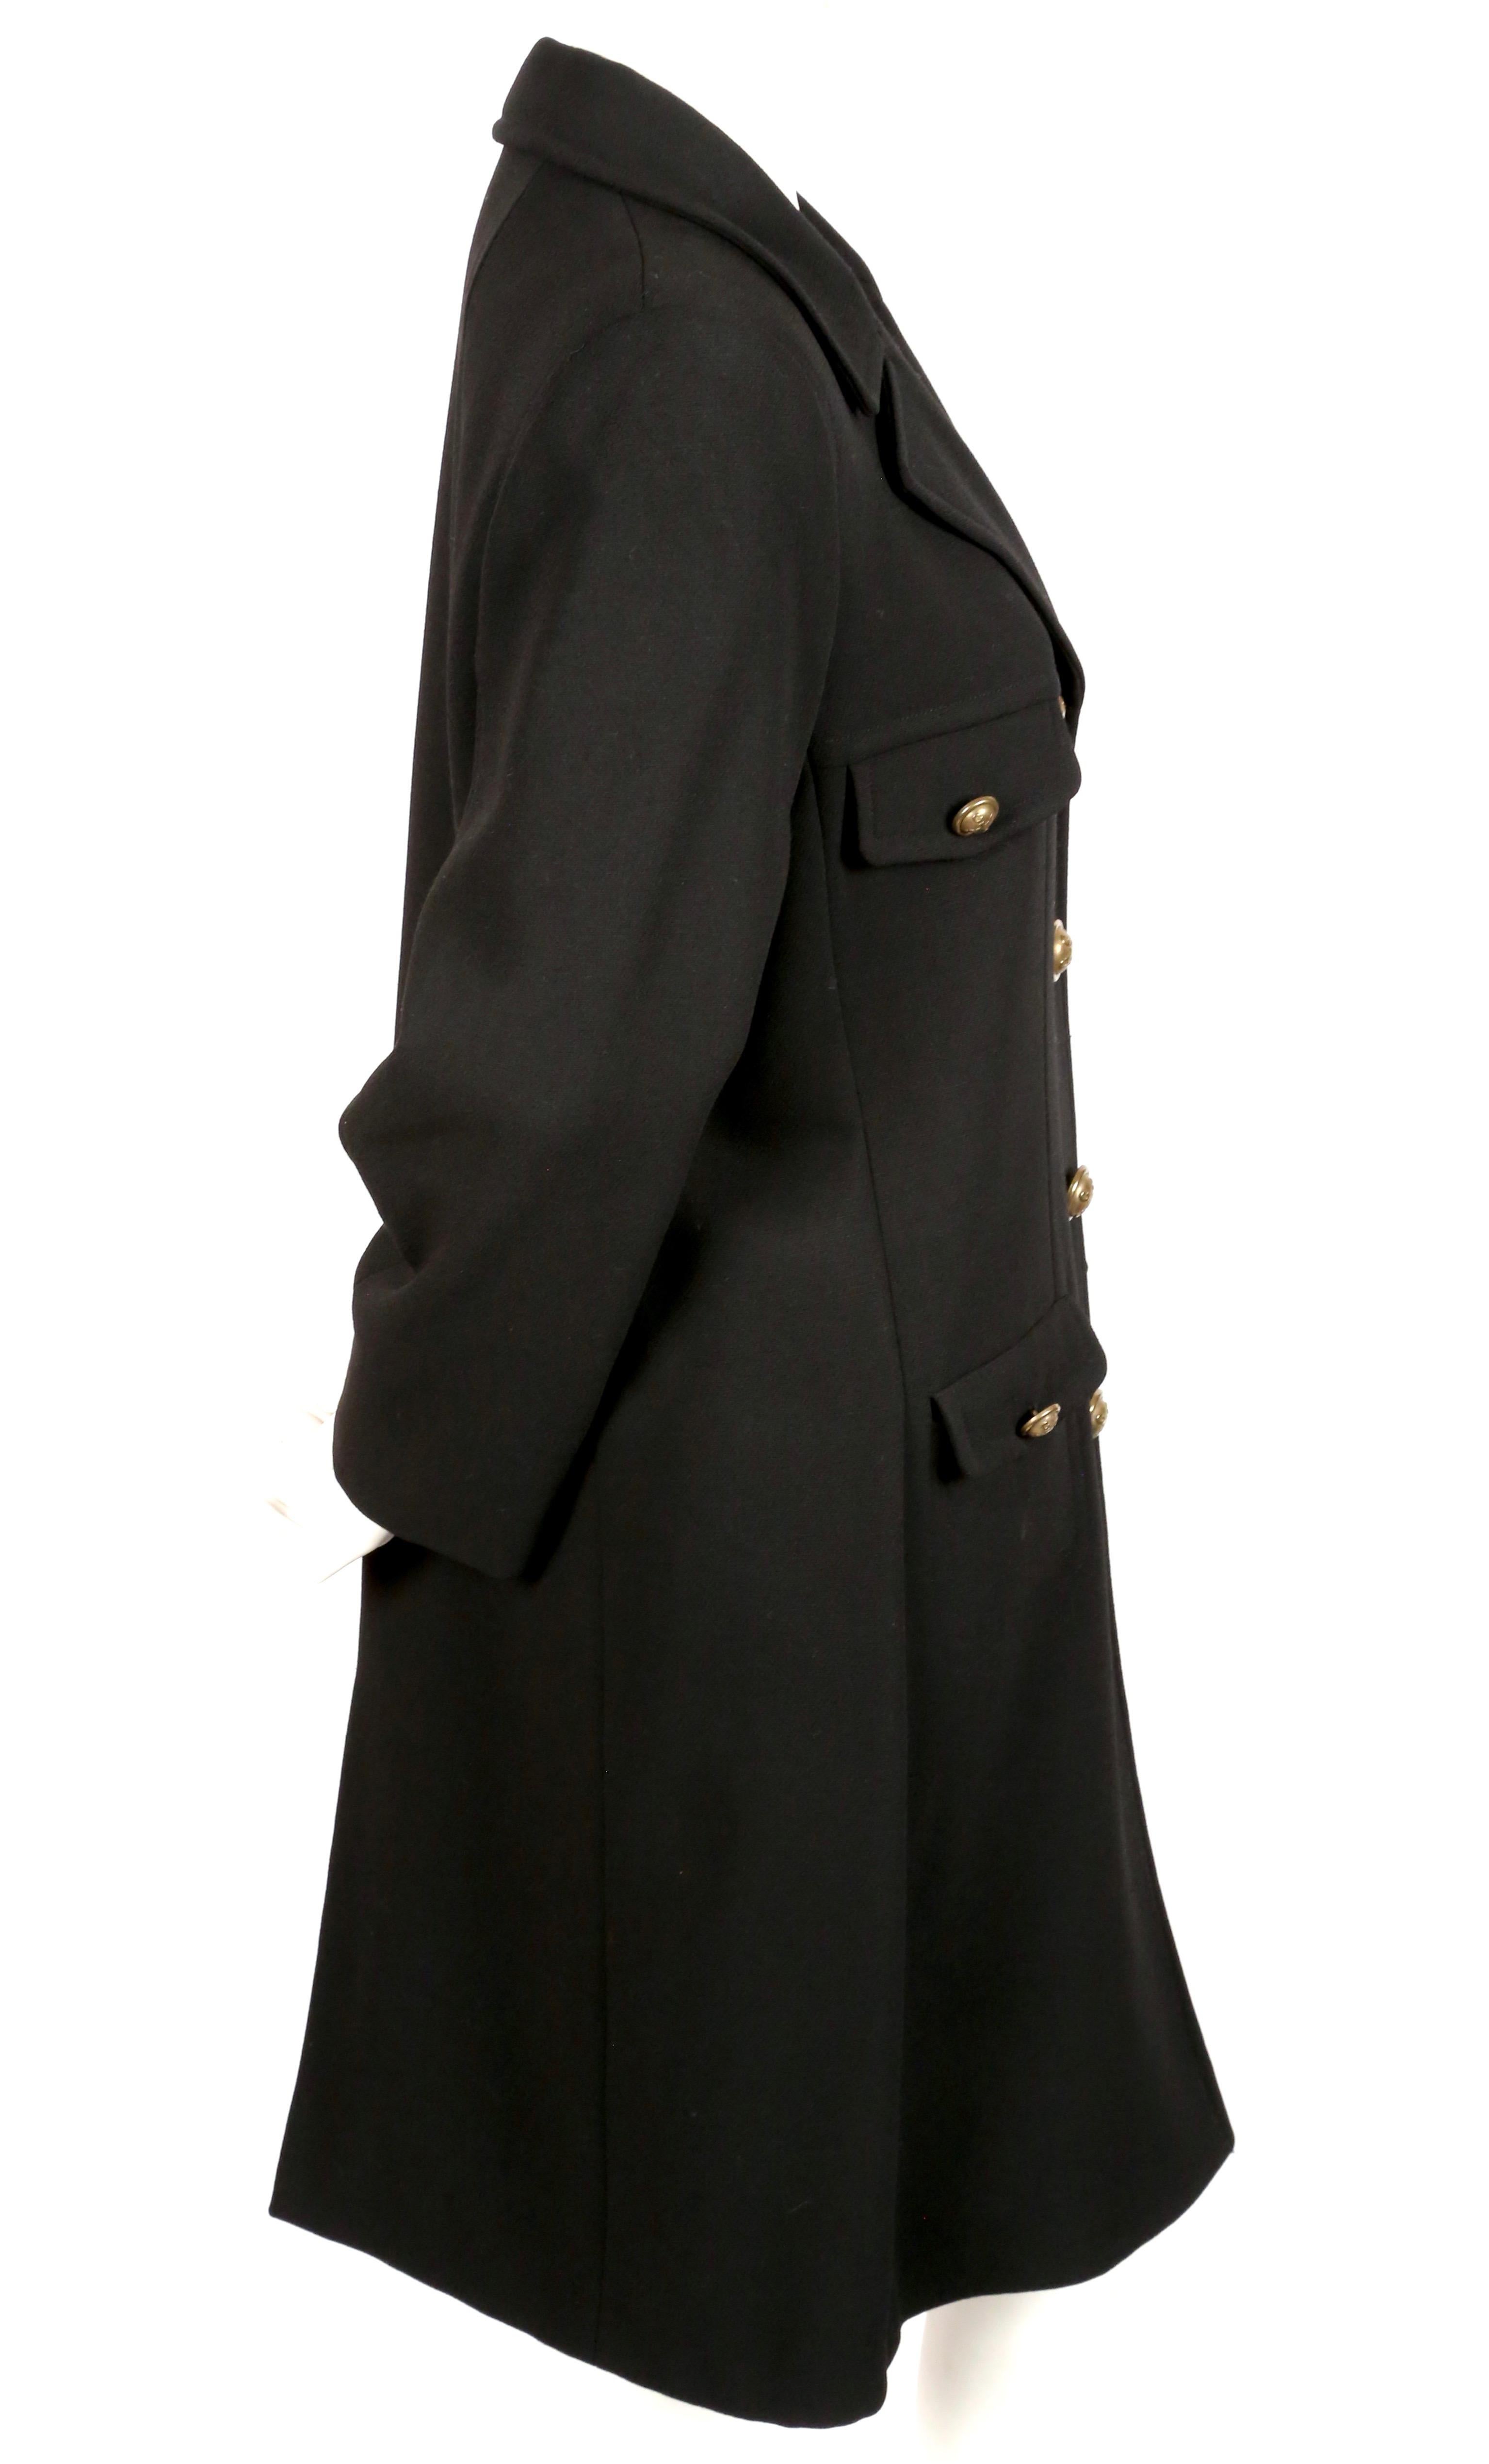 Jet black wool medium weight military coat from Moschino 'Cheap & Chic' dating to the 1990's. Italian size 40. Approximate measurements: shoulder 17